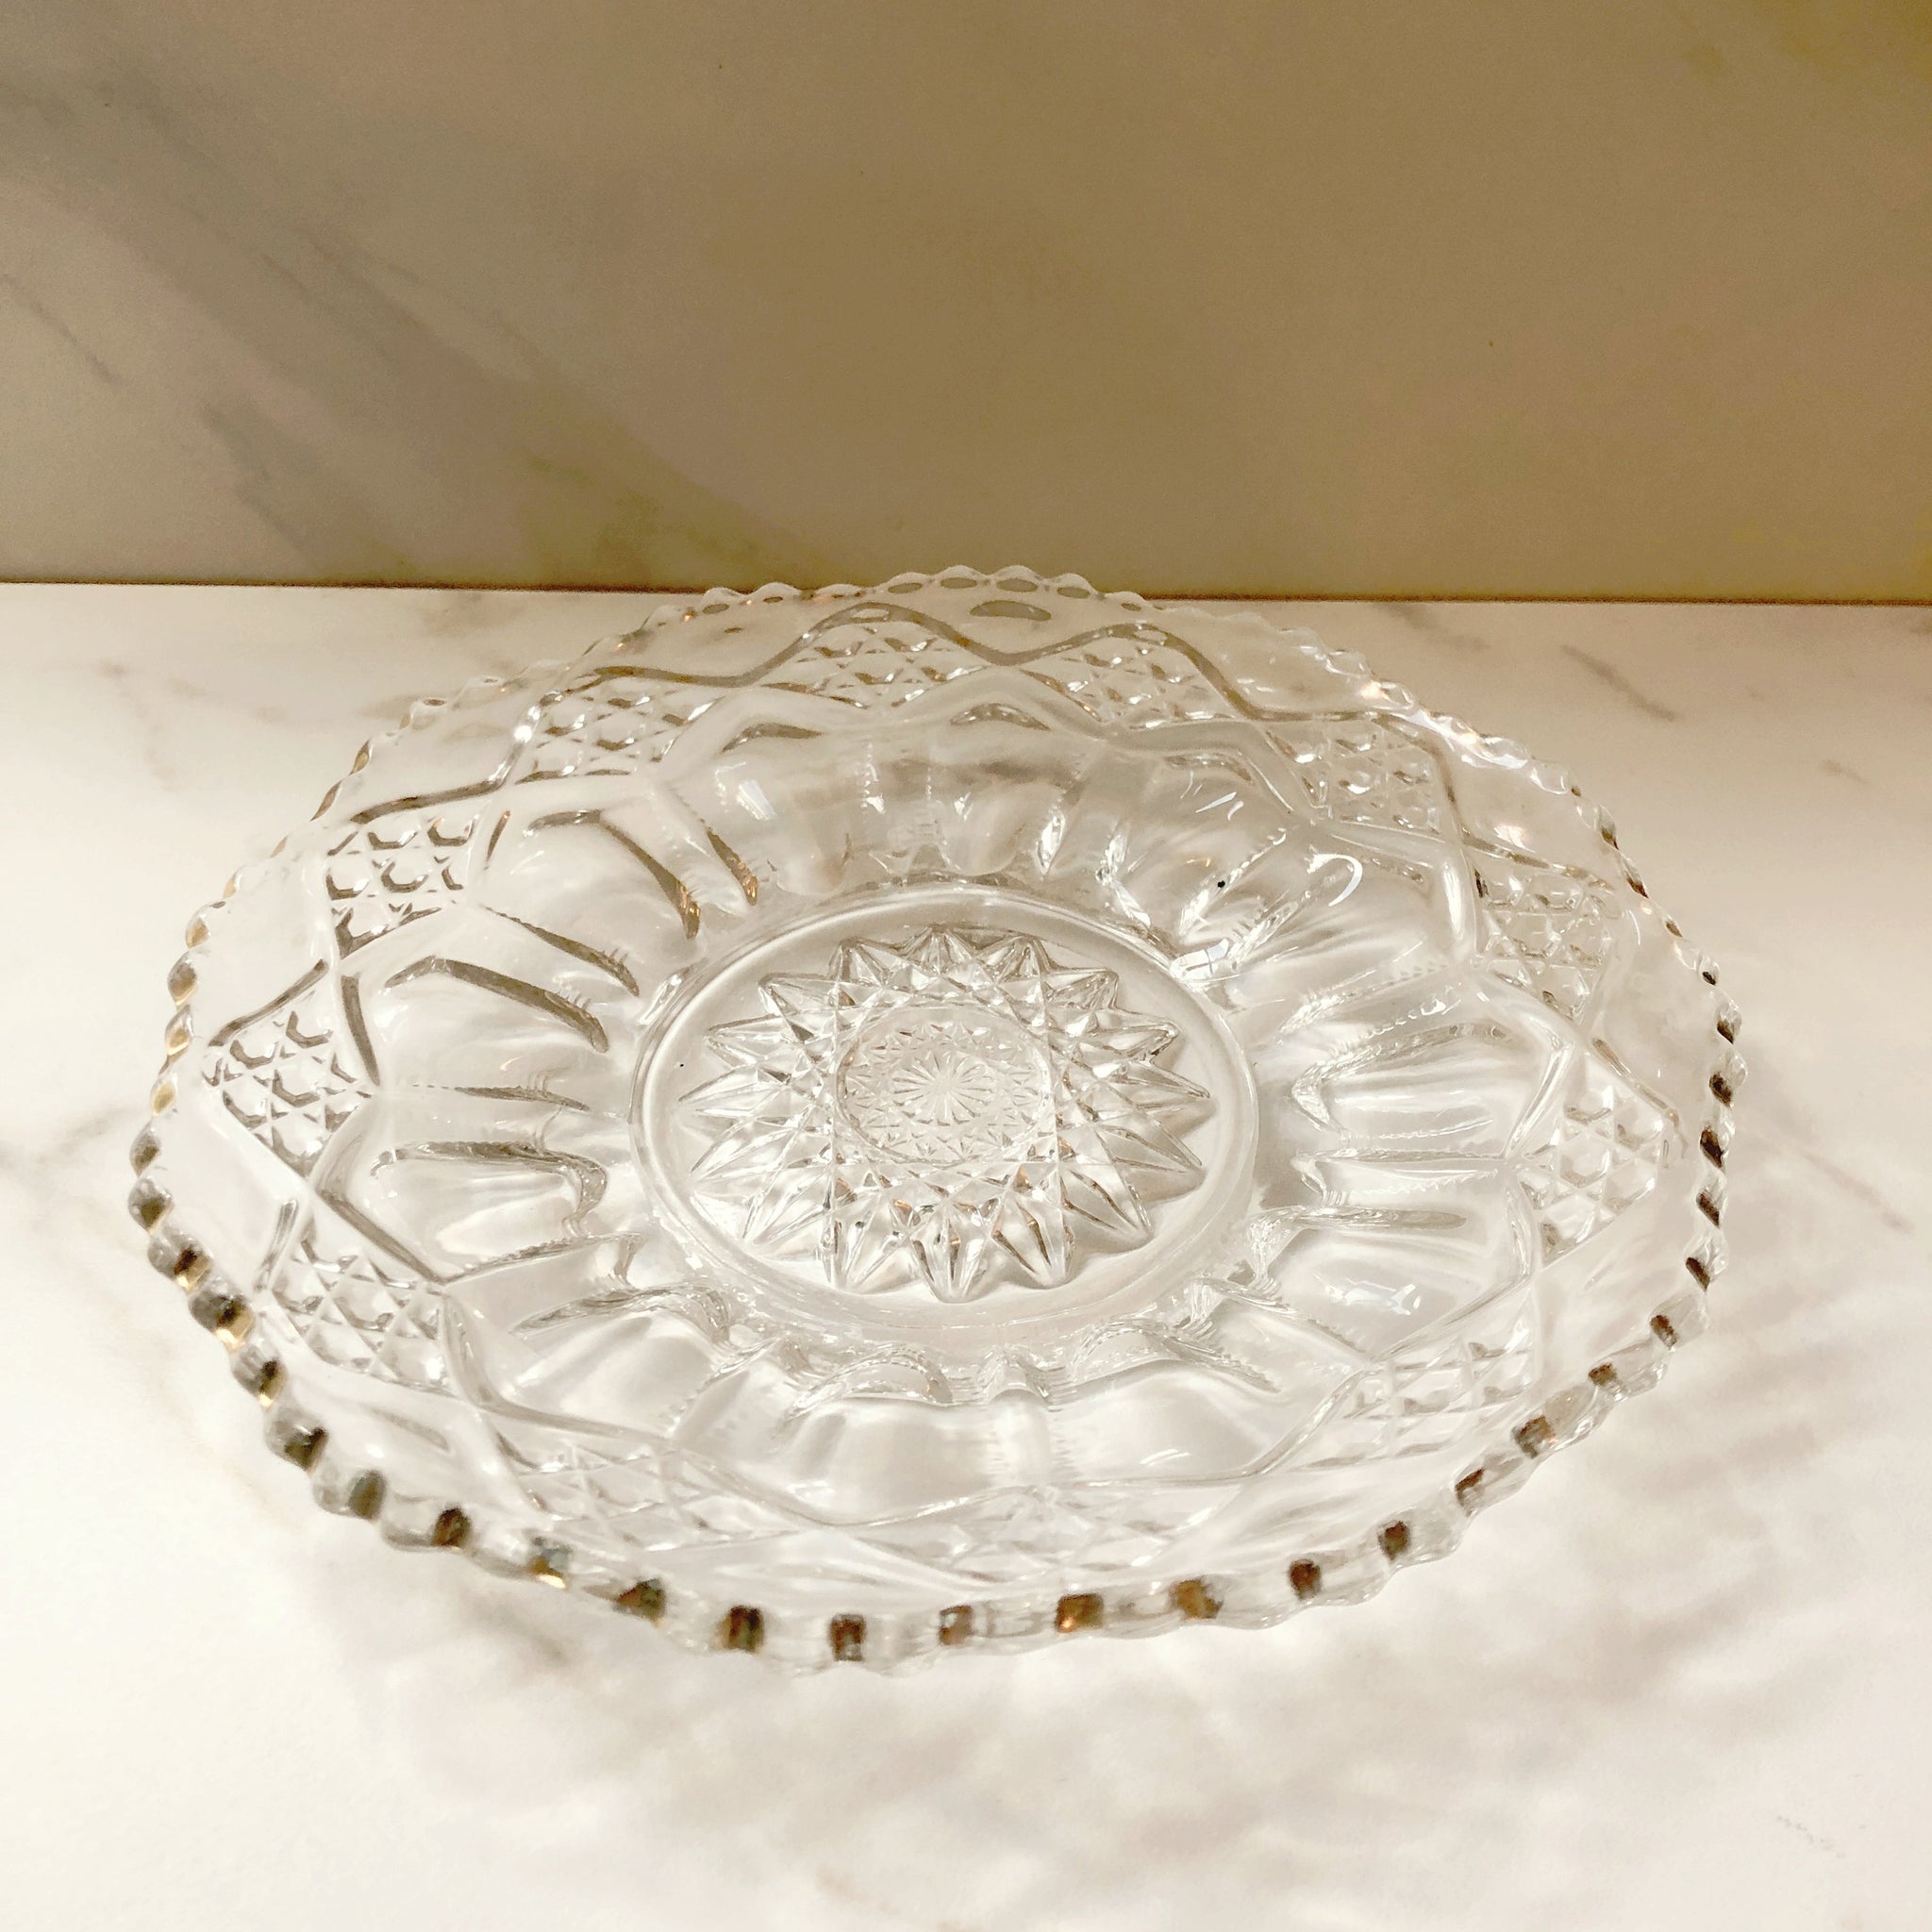 Vintage Crystal Catch-All Dish